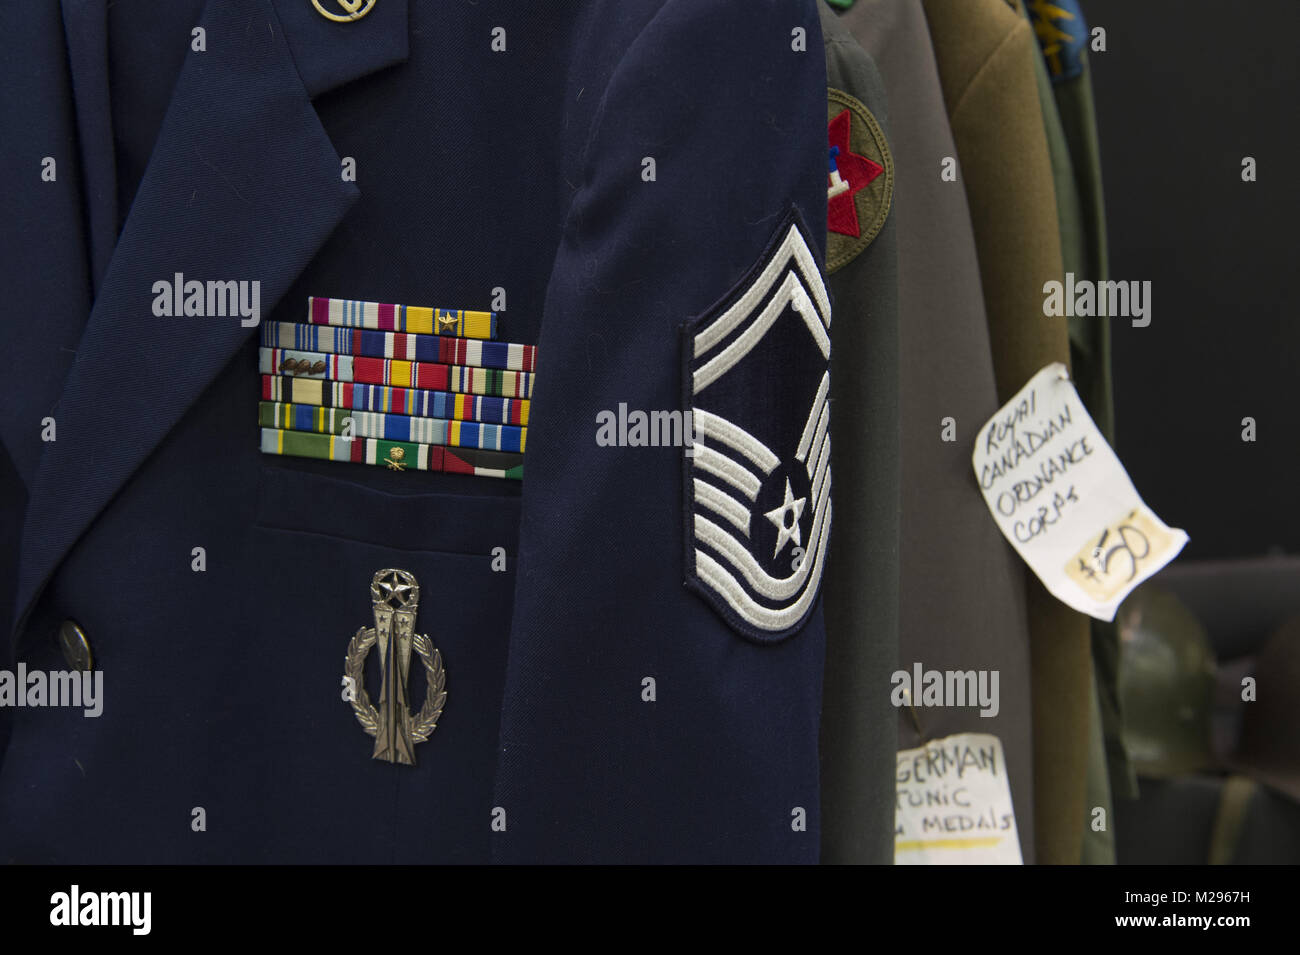 Dalton, GA, USA. 4th Feb, 2018. Military memorabilia and relics collectors gathered at Dalton Georgia exhibition center to buy, sell, trade swords, muskets, bullets and uniforms from 1800s to the Vietnam era. Military enthusiasts often spend thousands of dollars on their collections. Pictured: U.S. Air Force uniform for sale, including ribbons Credit: Robin Rayne Nelson/ZUMA Wire/Alamy Live News Stock Photo